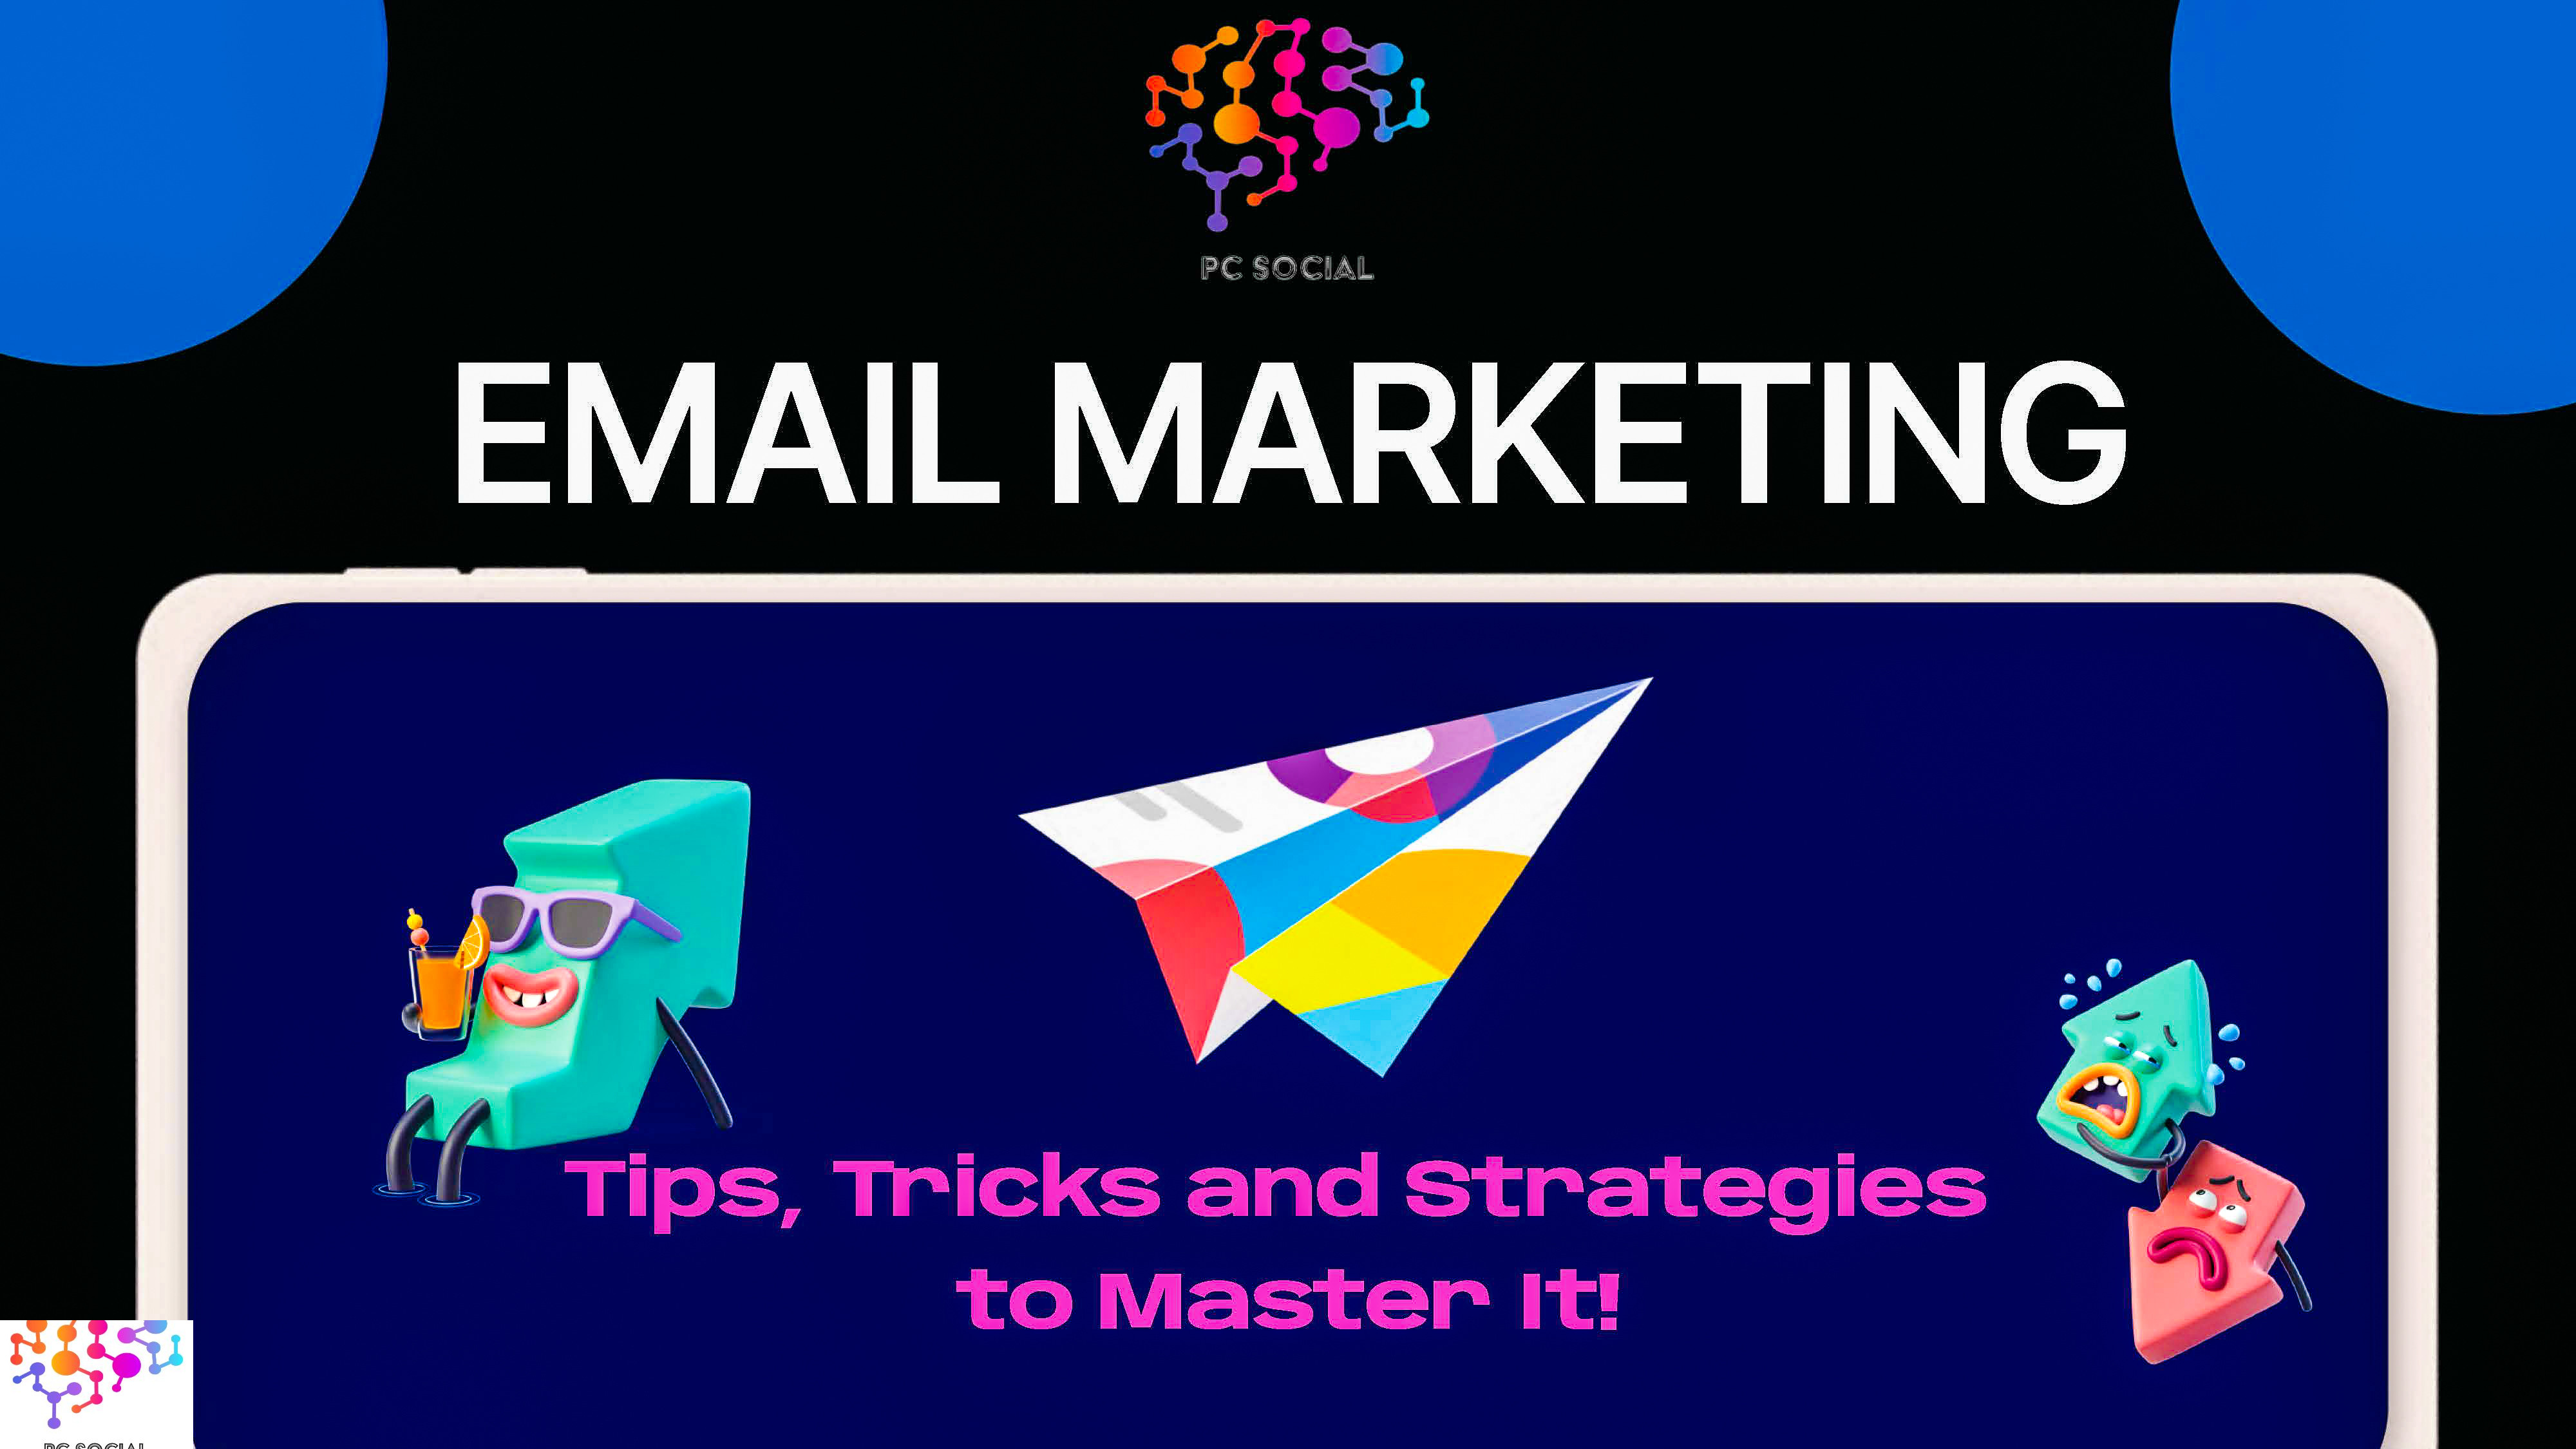 Marketing, Email Marketing, Email Strategy, Email Marketing Tips, Insights project Consultants, Llc | Pc Social